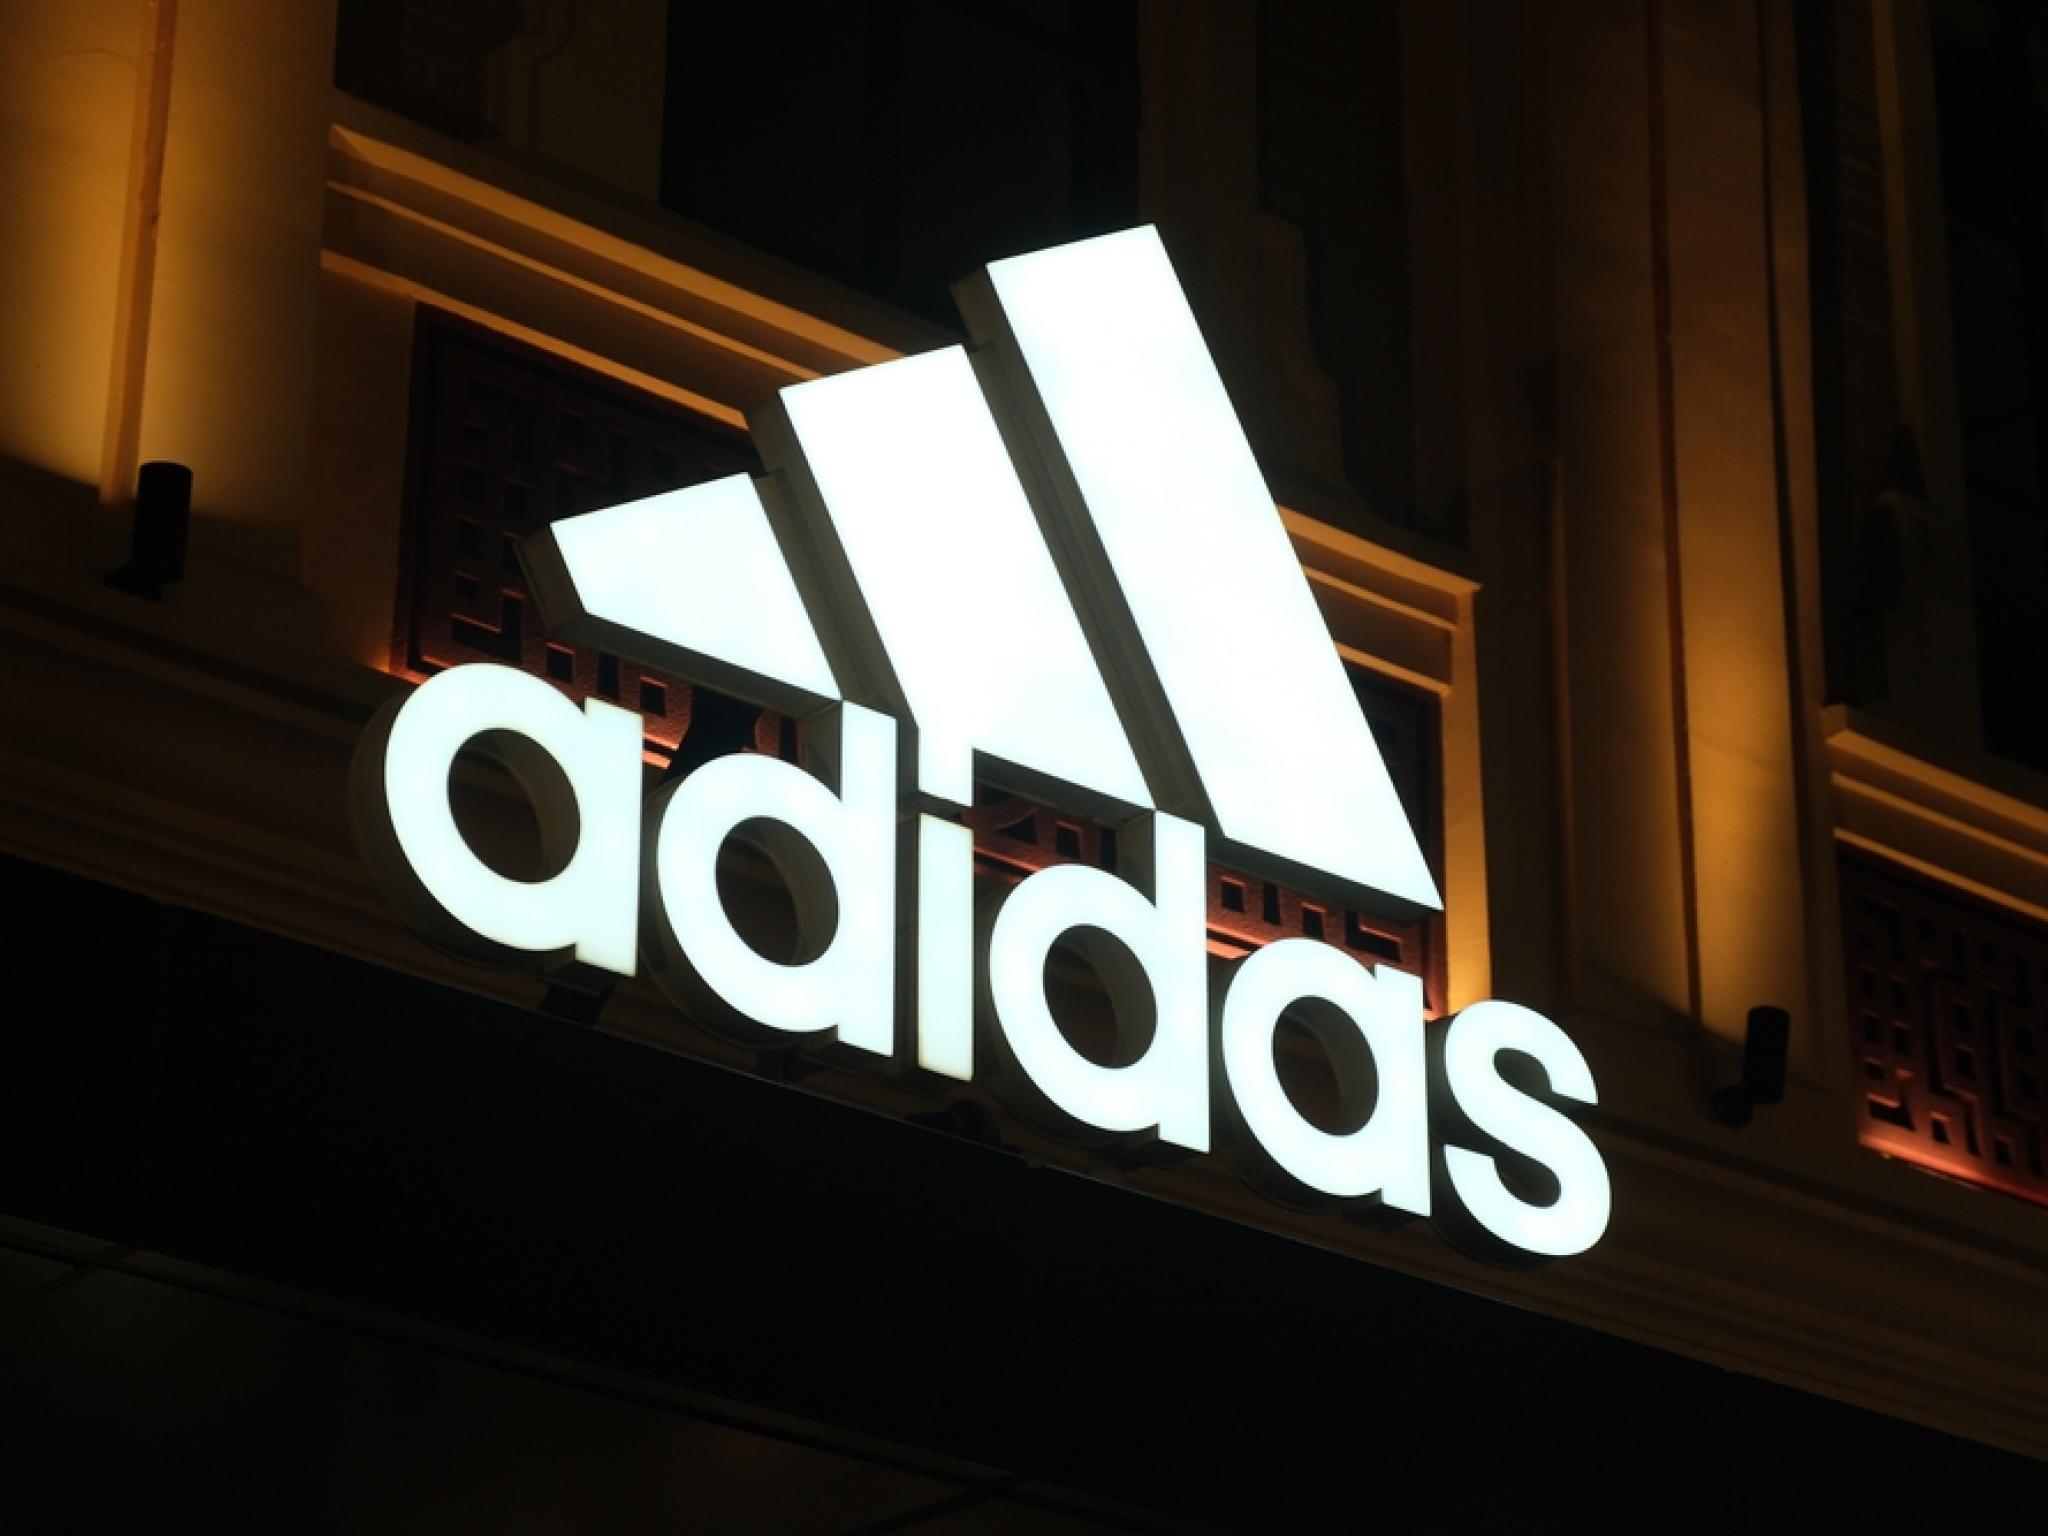  adidas-bribery-allegations-lead-to-staff-exits-in-china 